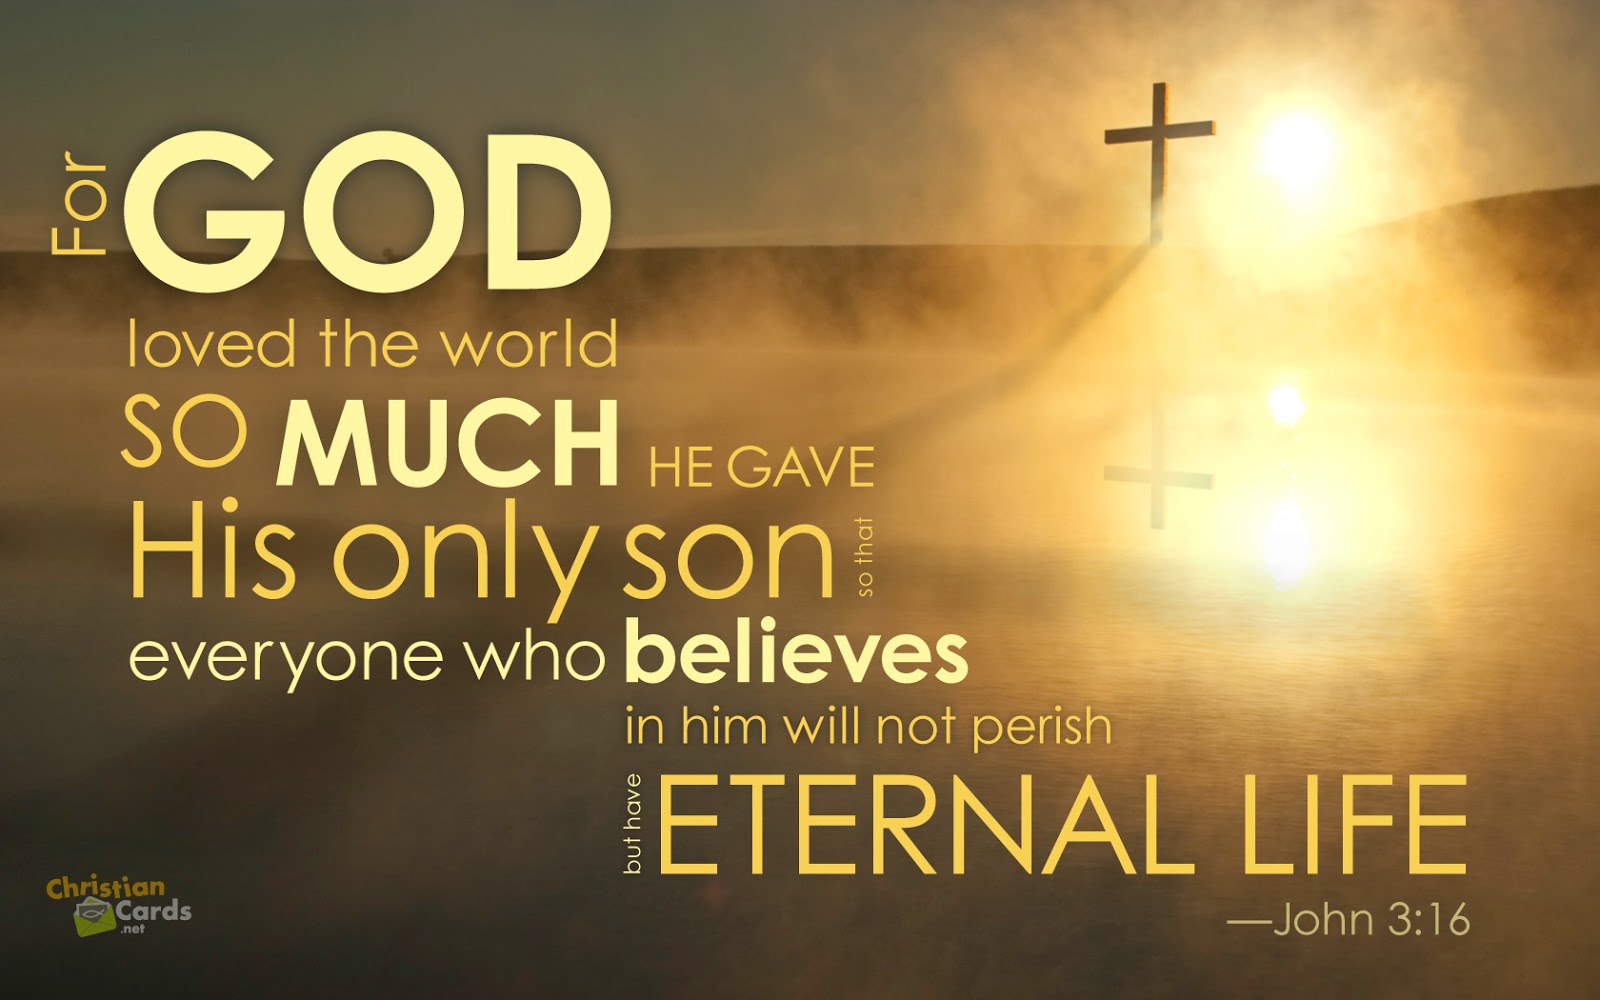 For God loved the world so much He gave his only son to that everyone